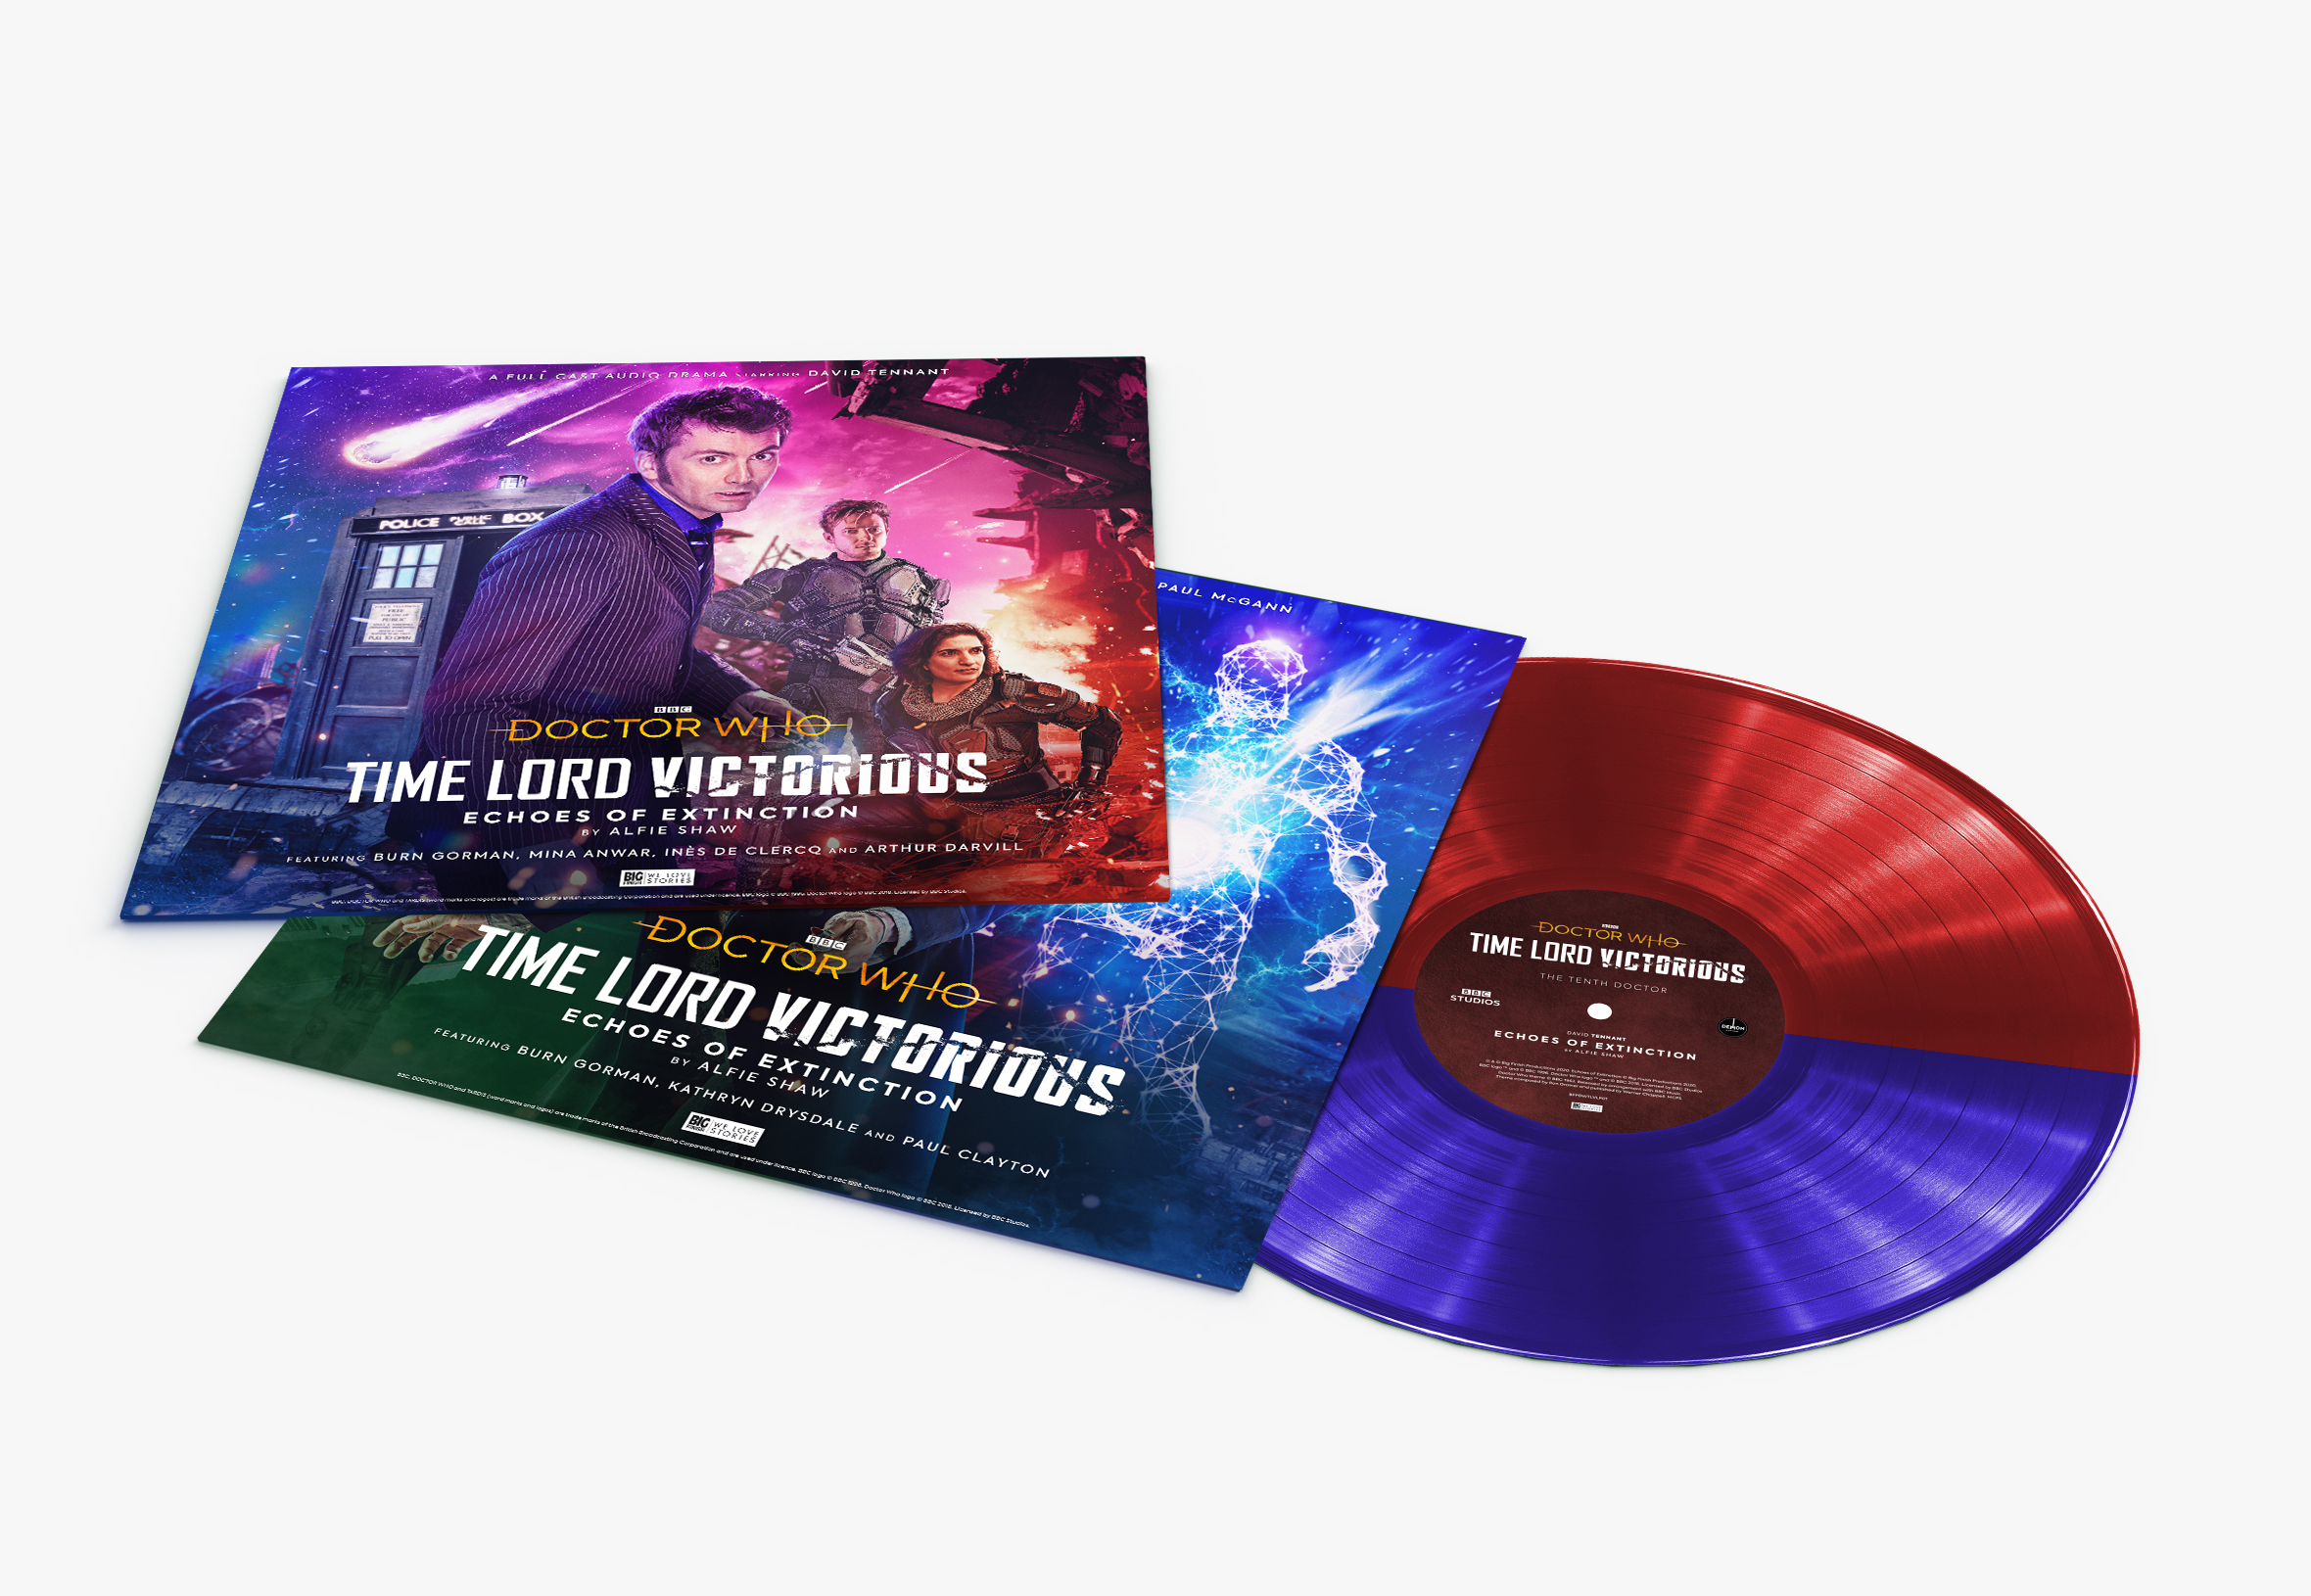 Time Lord Victorious: Echoes of Extinction